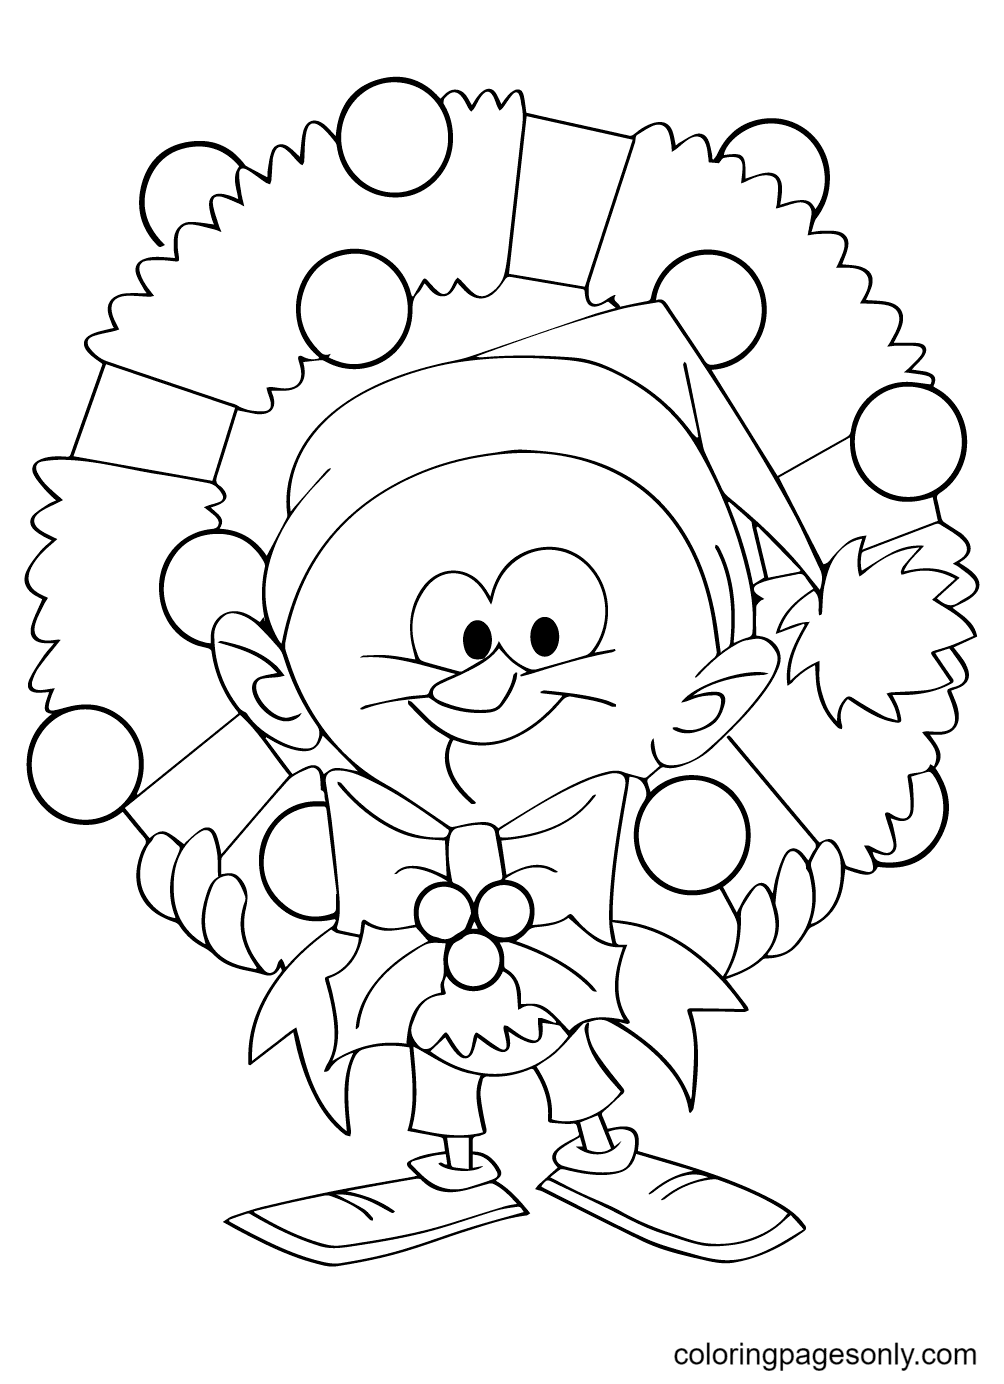 Cartoon Guy Holding Christmas Wreath Coloring Page